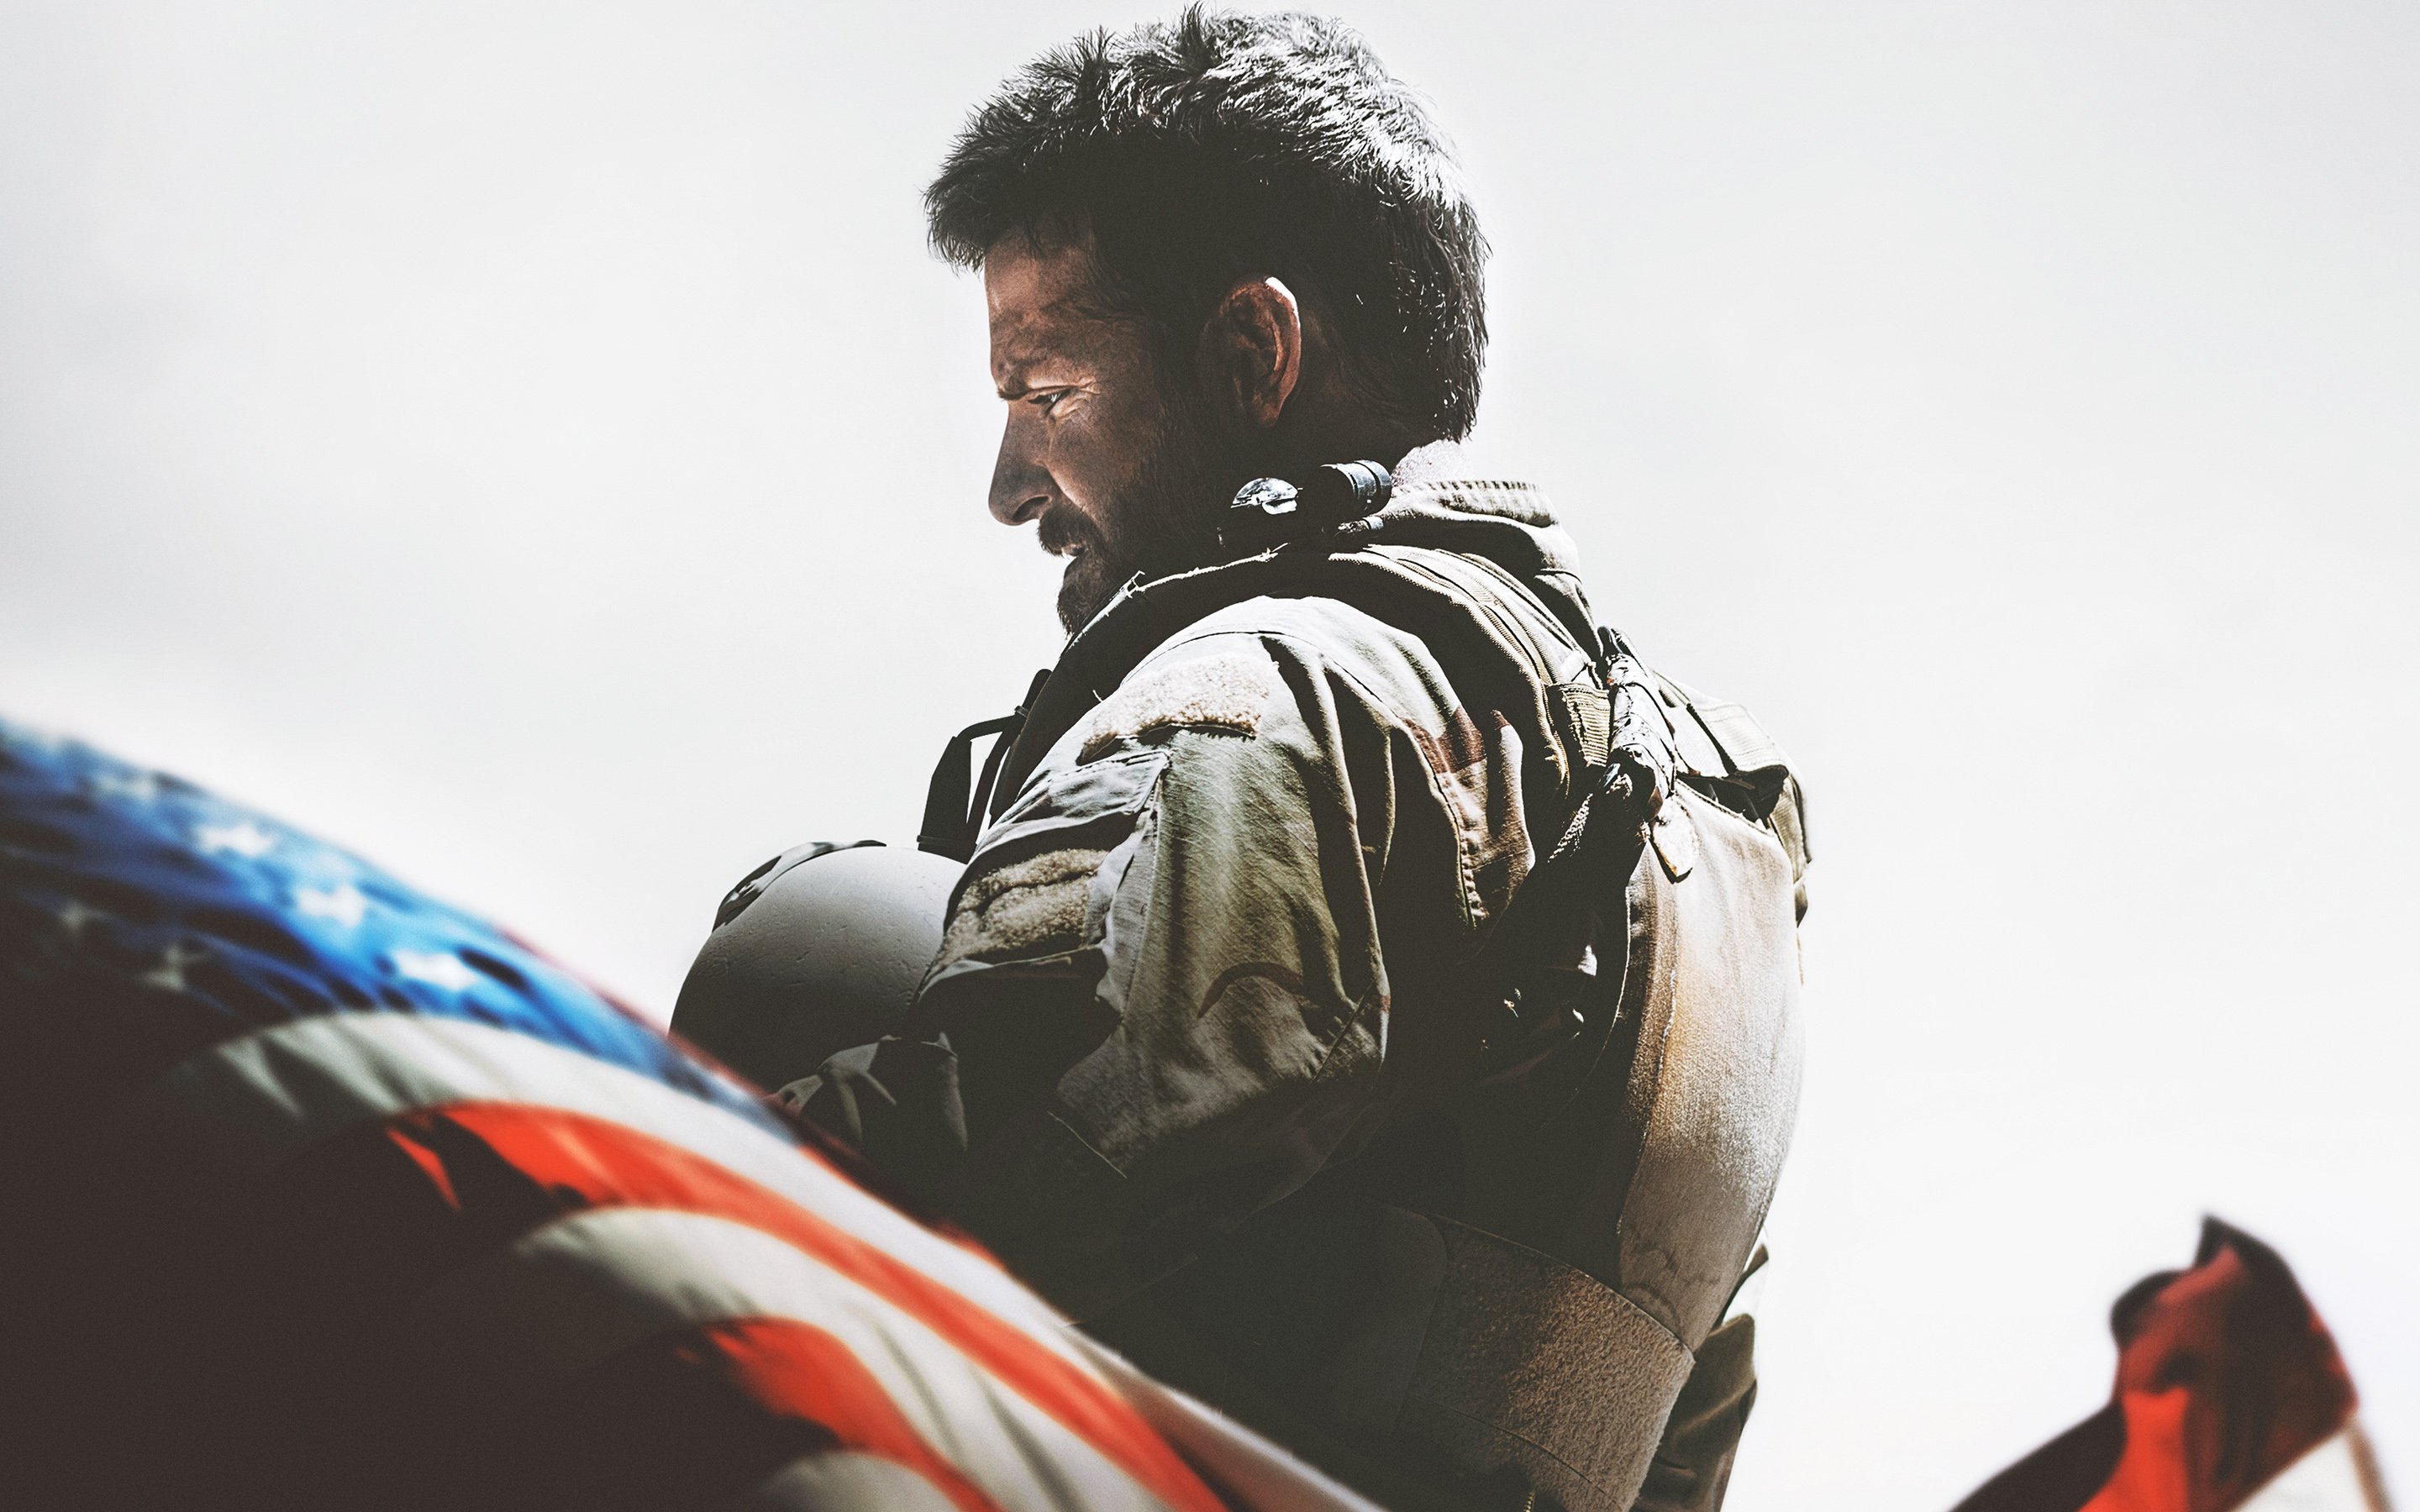 american, Sniper, Biography, Military, War, Fighting, Navy, Seal, Action, Clint, Eastwood, 1americansniper, Weapon, Gun Wallpaper